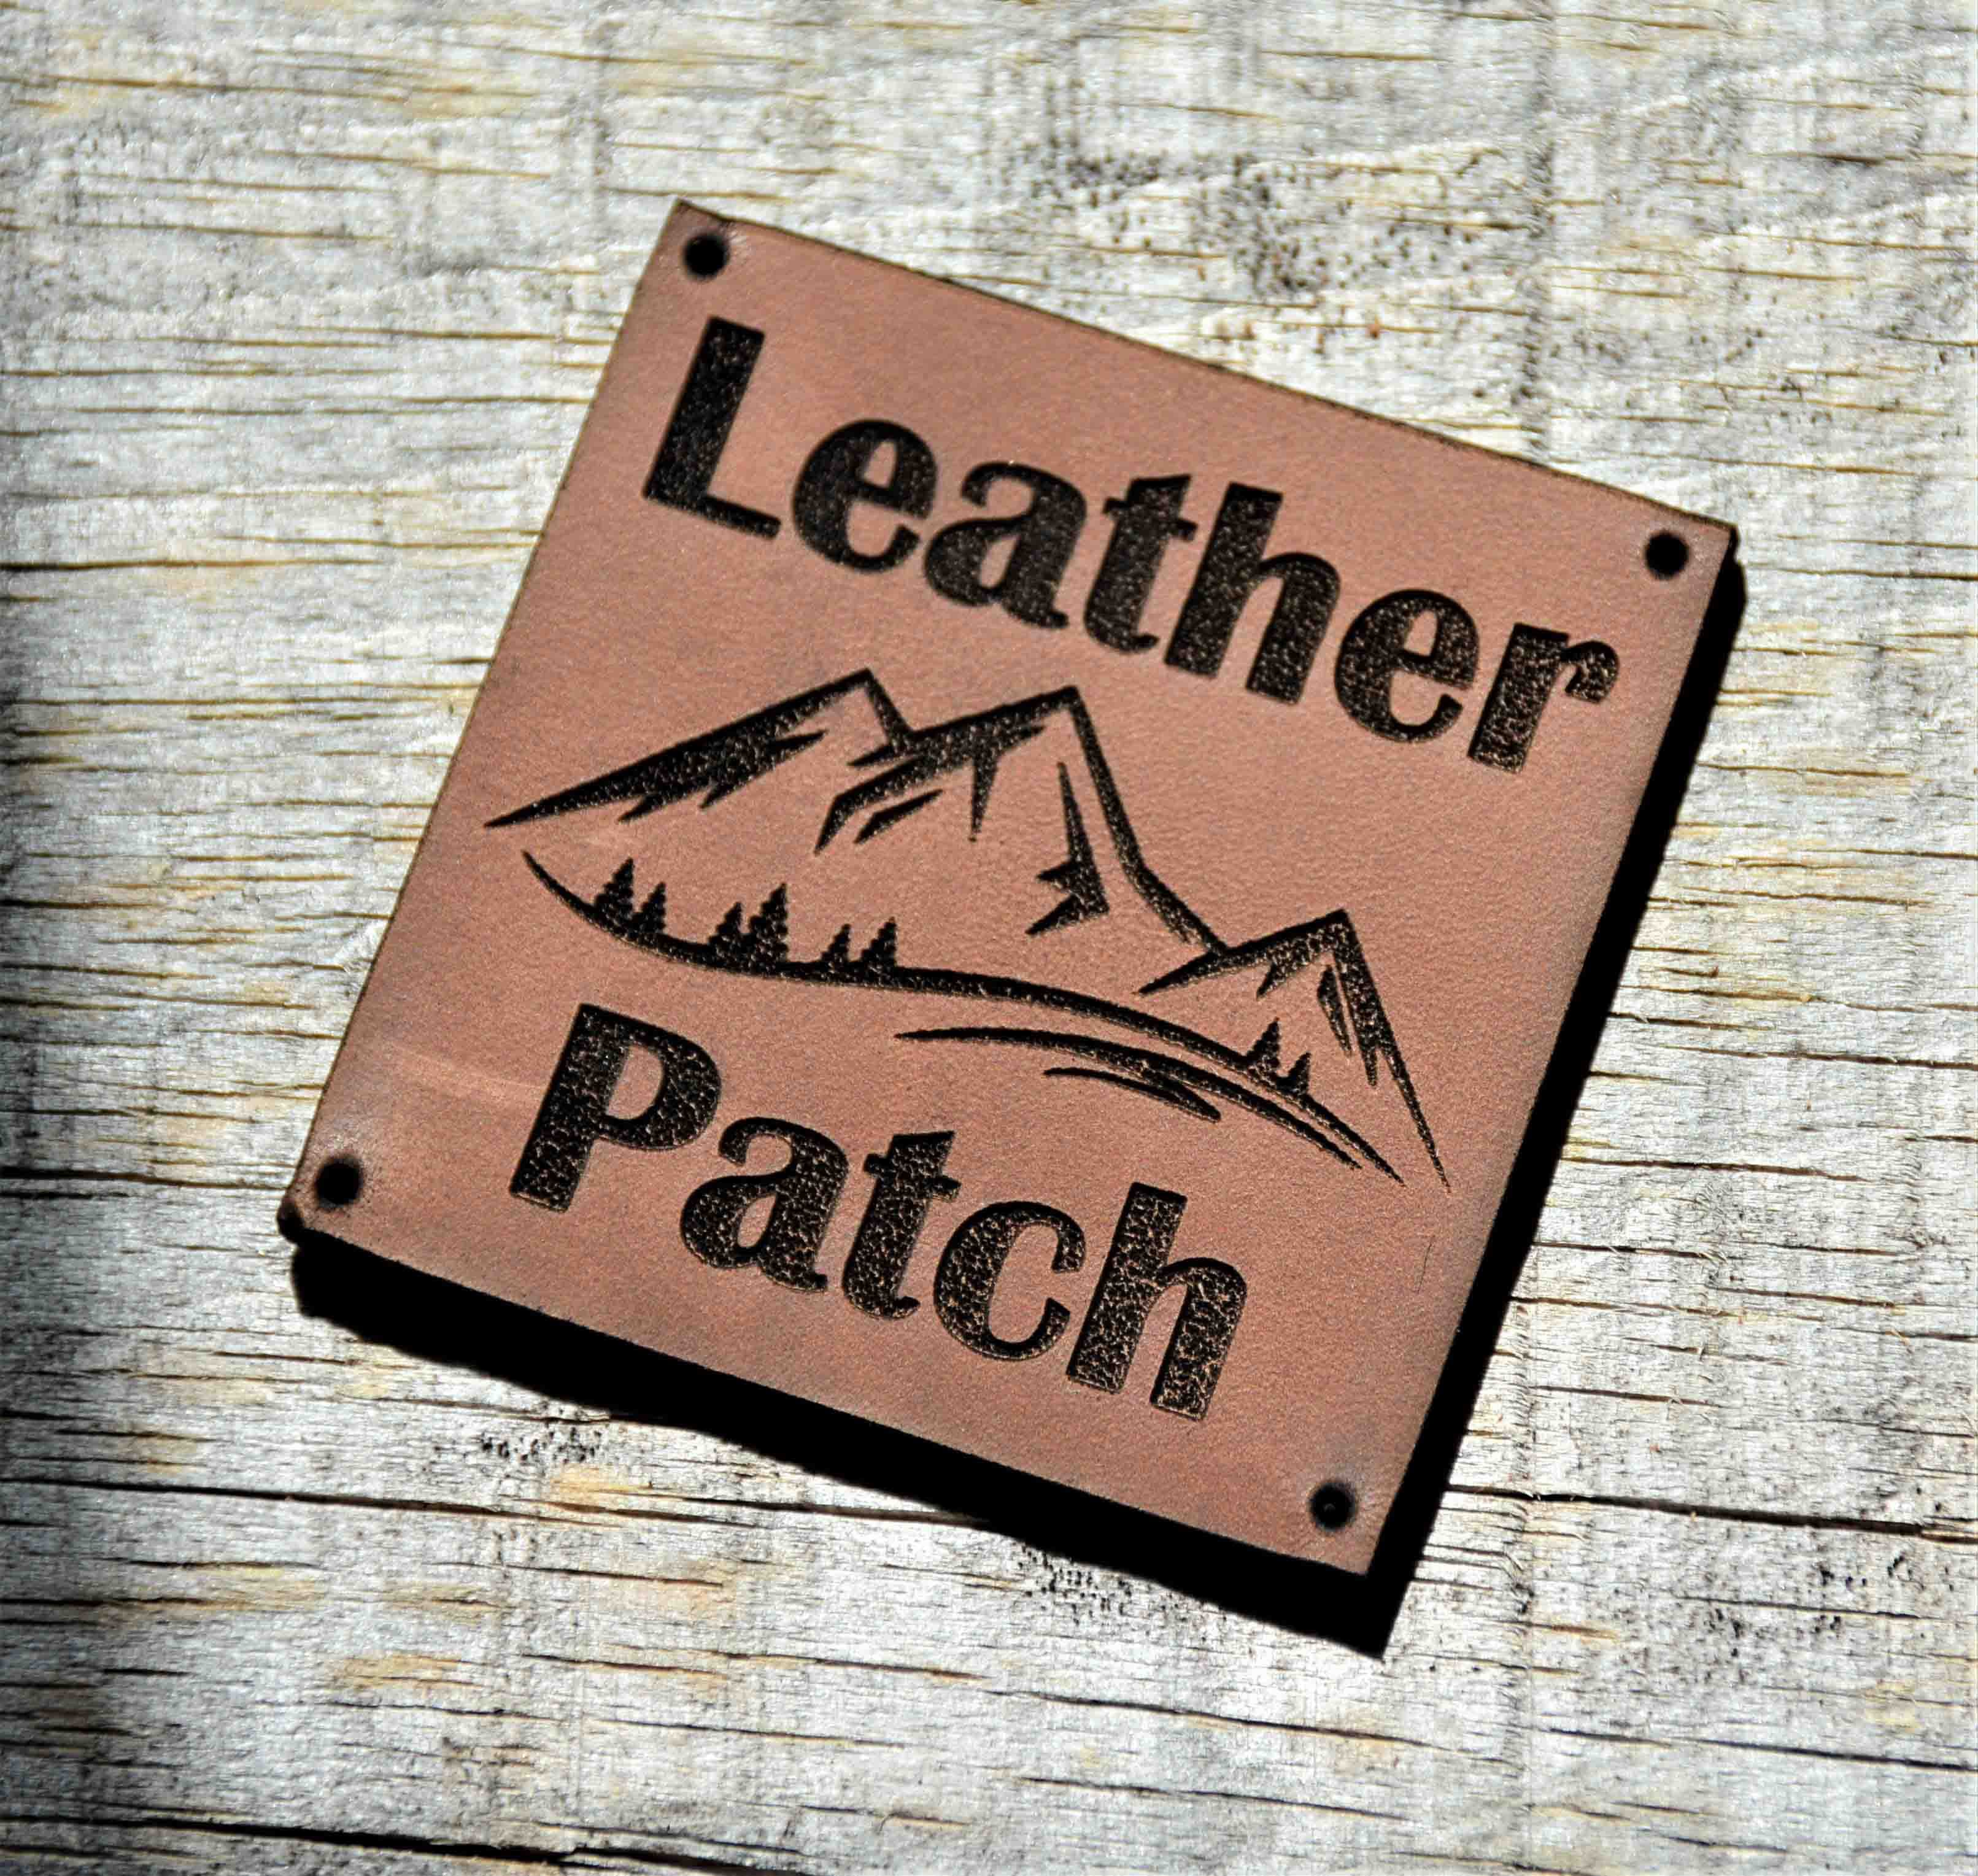 Leather Patches.